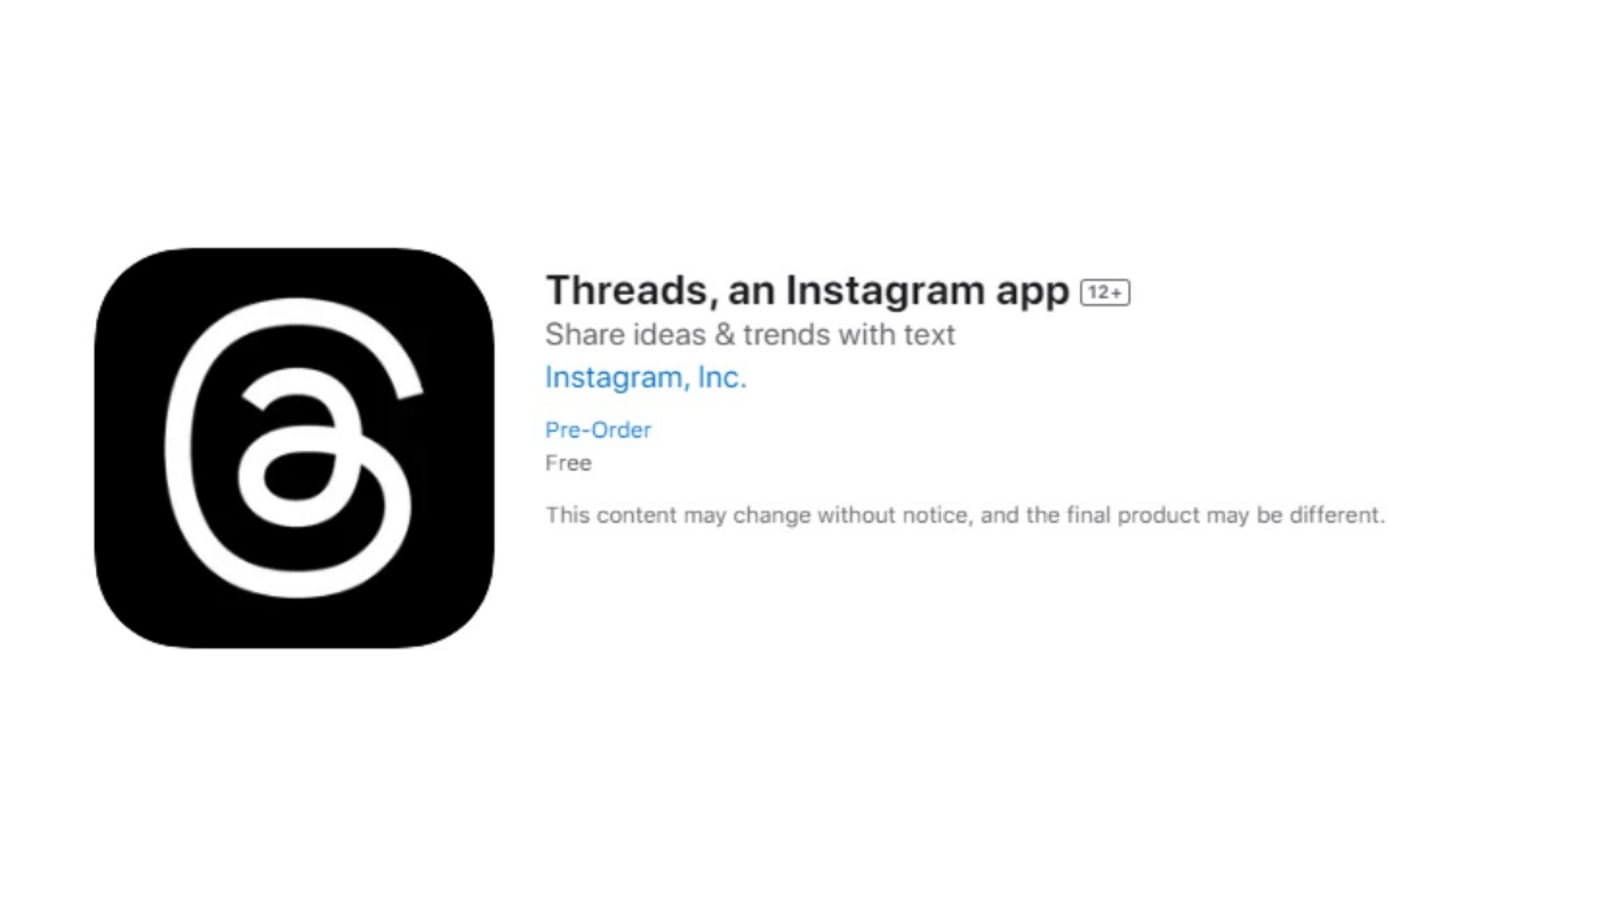 What Is the Threads Logo Supposed to Look Like? - The New York Times